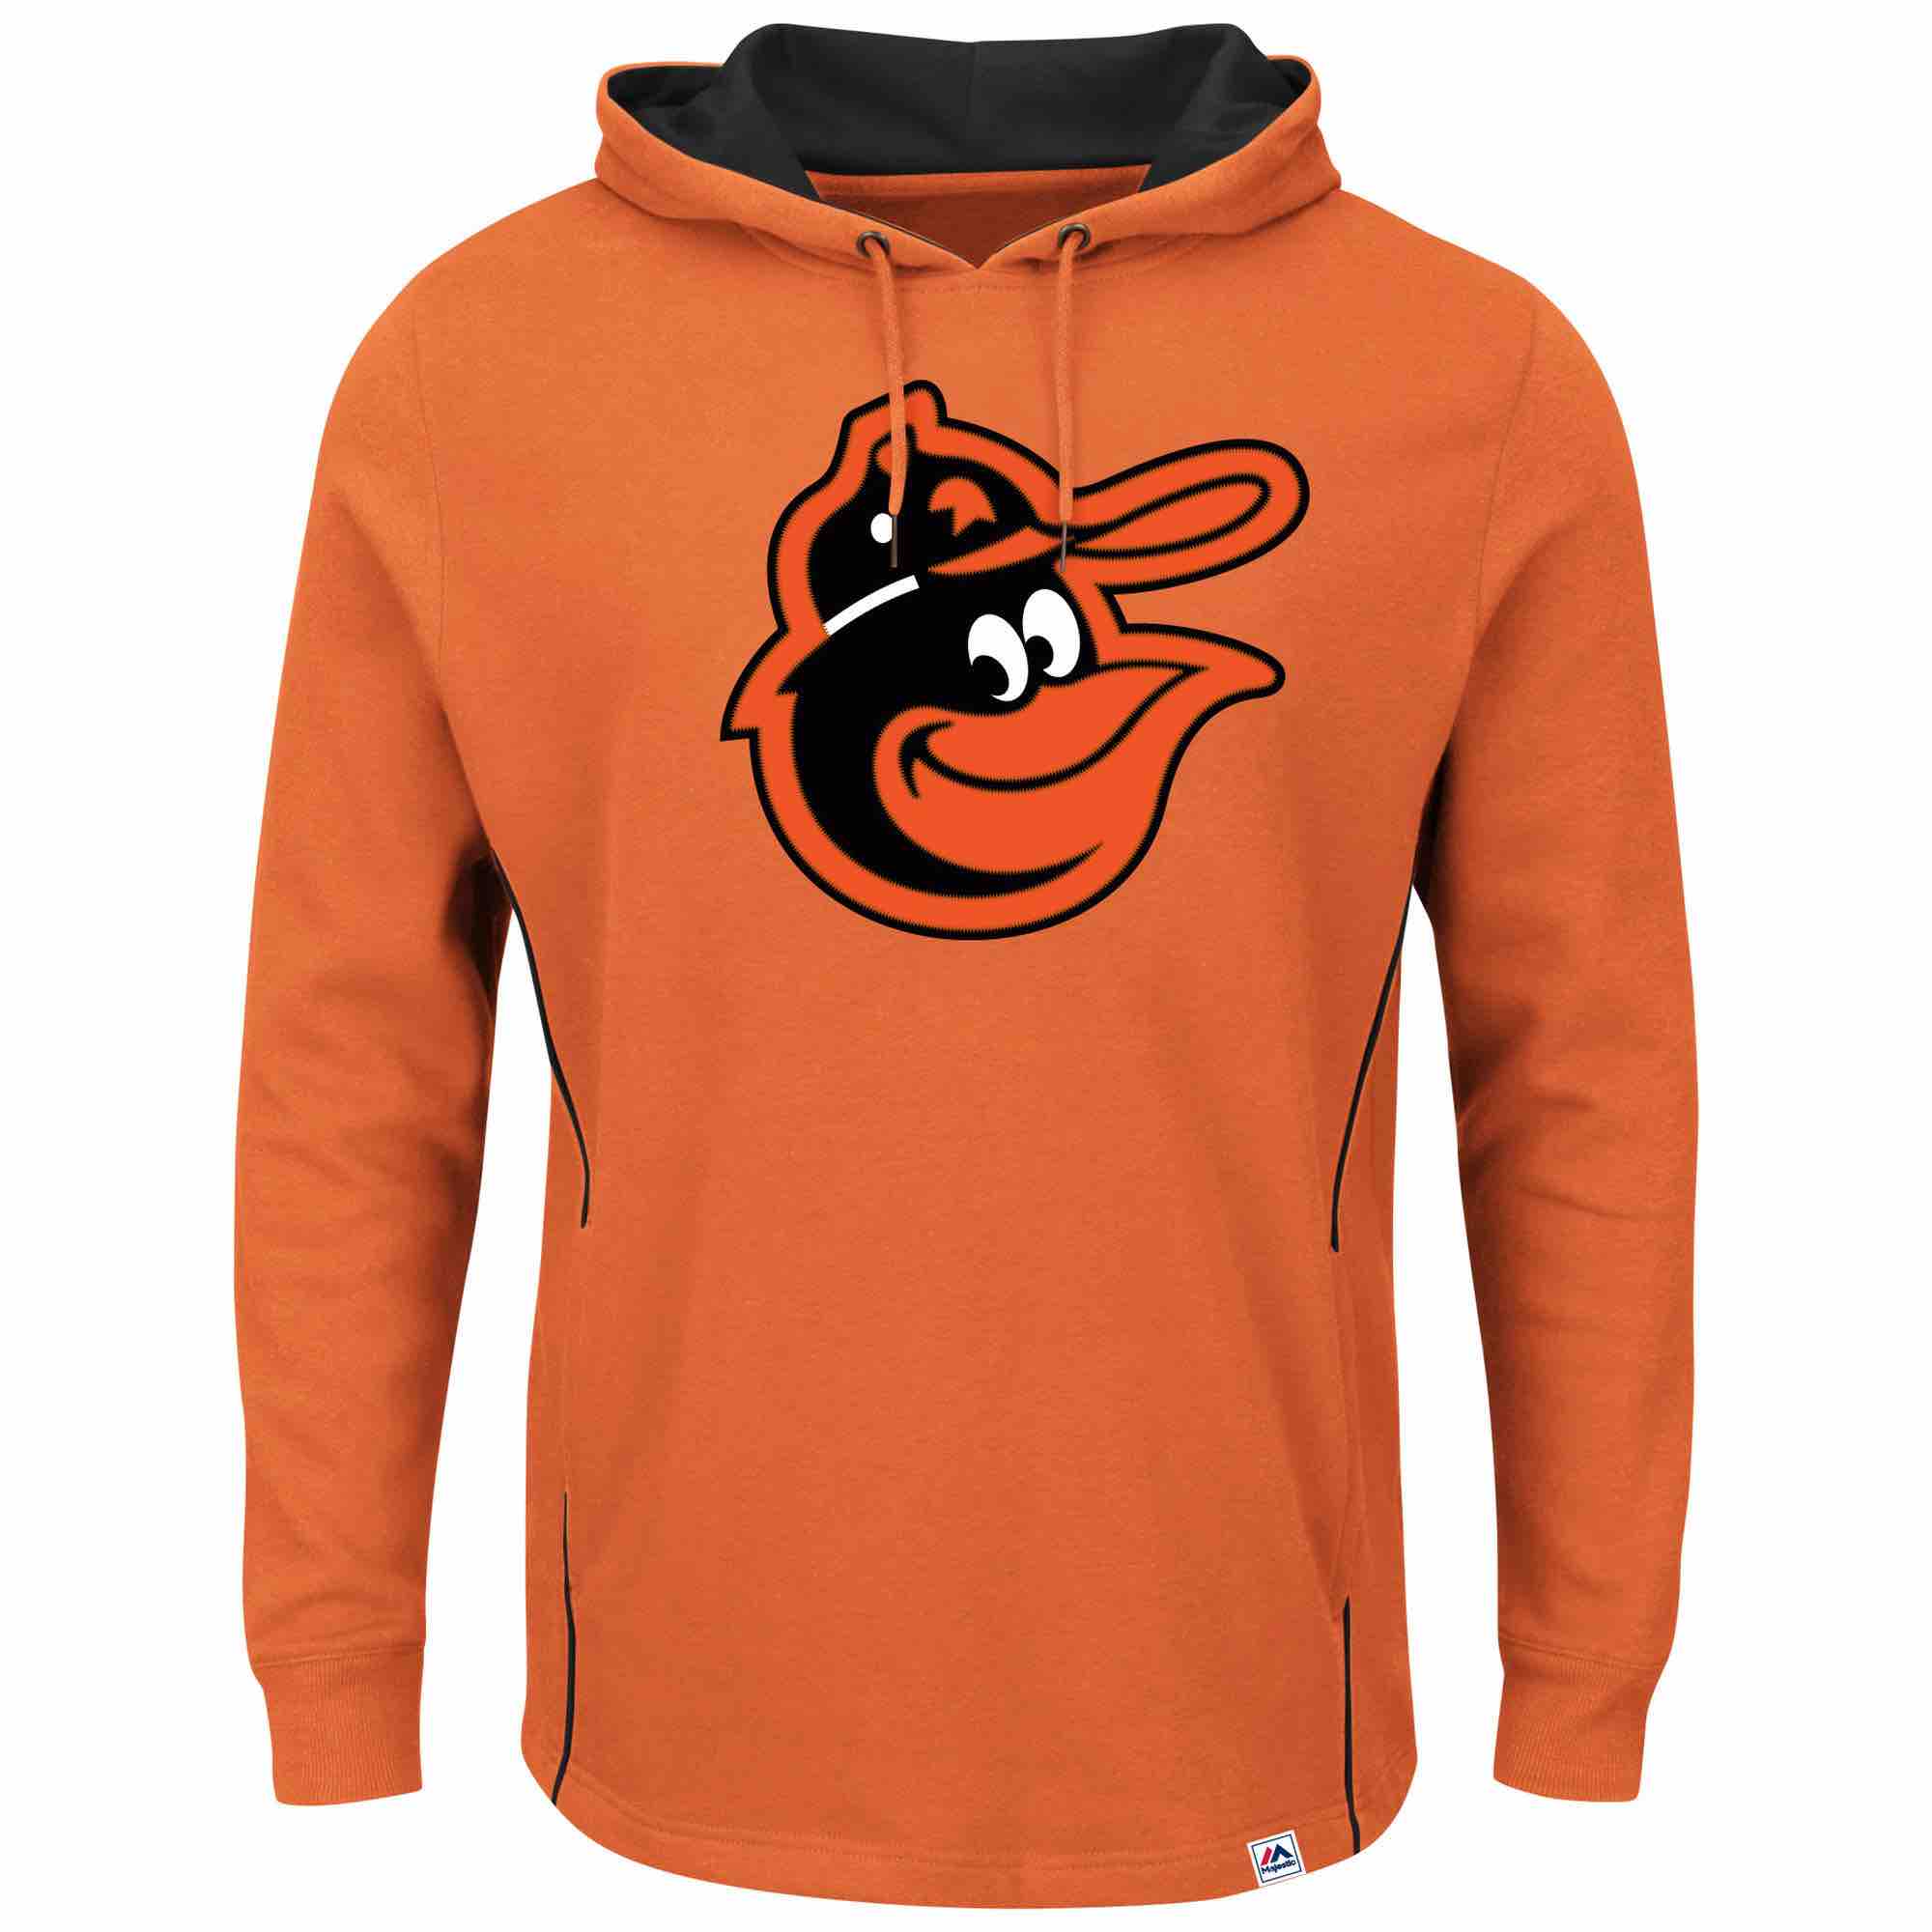 MLB Baltimore Orioles Personalized Orange Stitched Hoodie